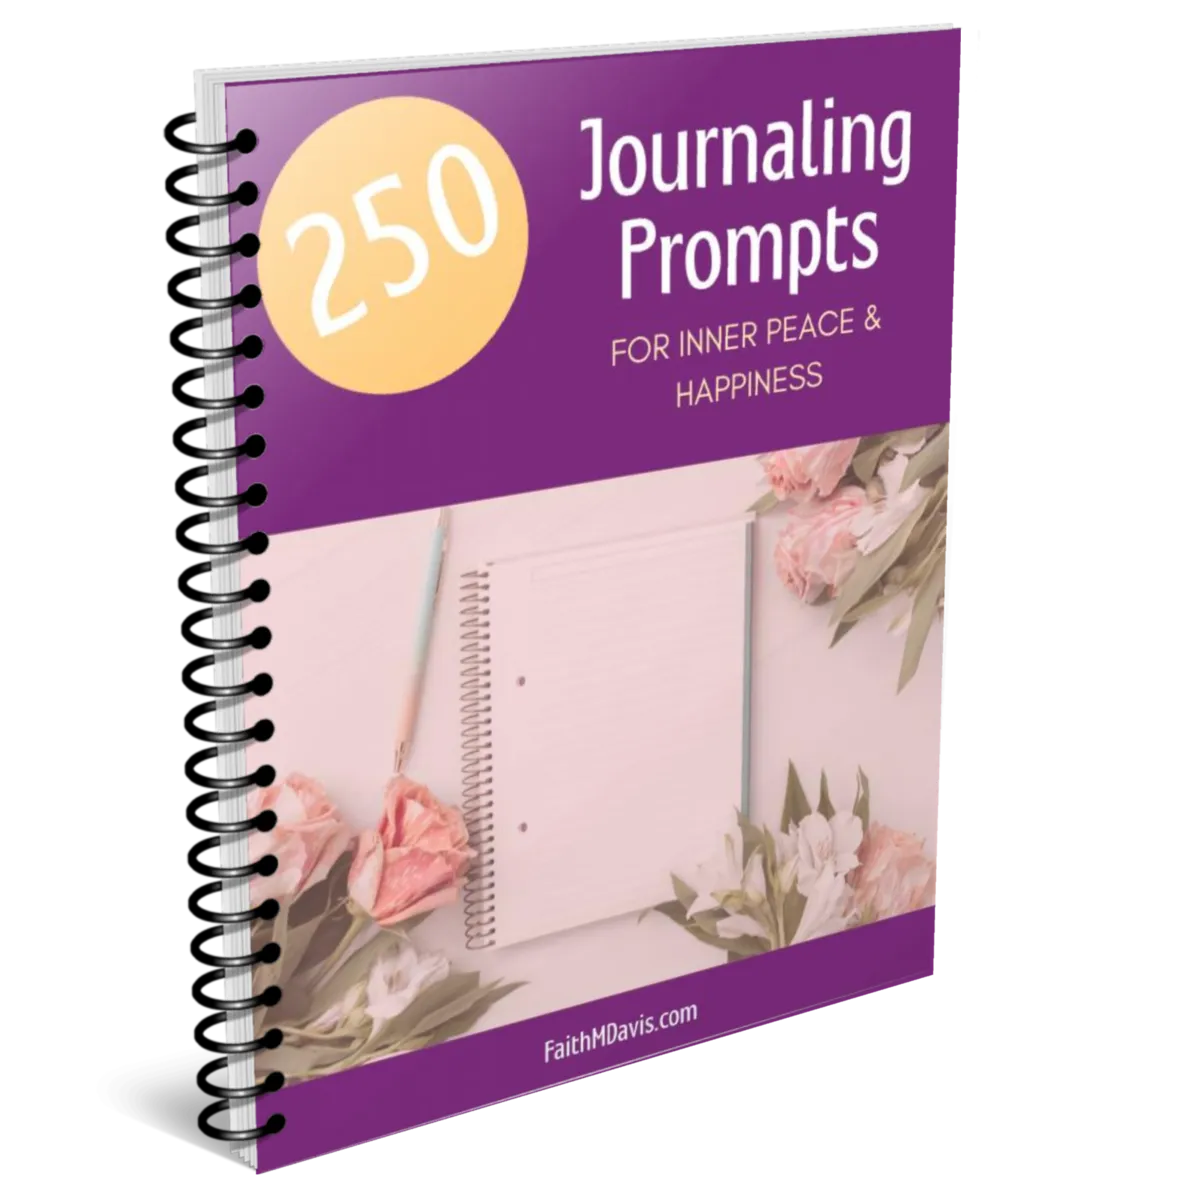 250 Journaling Prompts for Inner Peace & Happiness